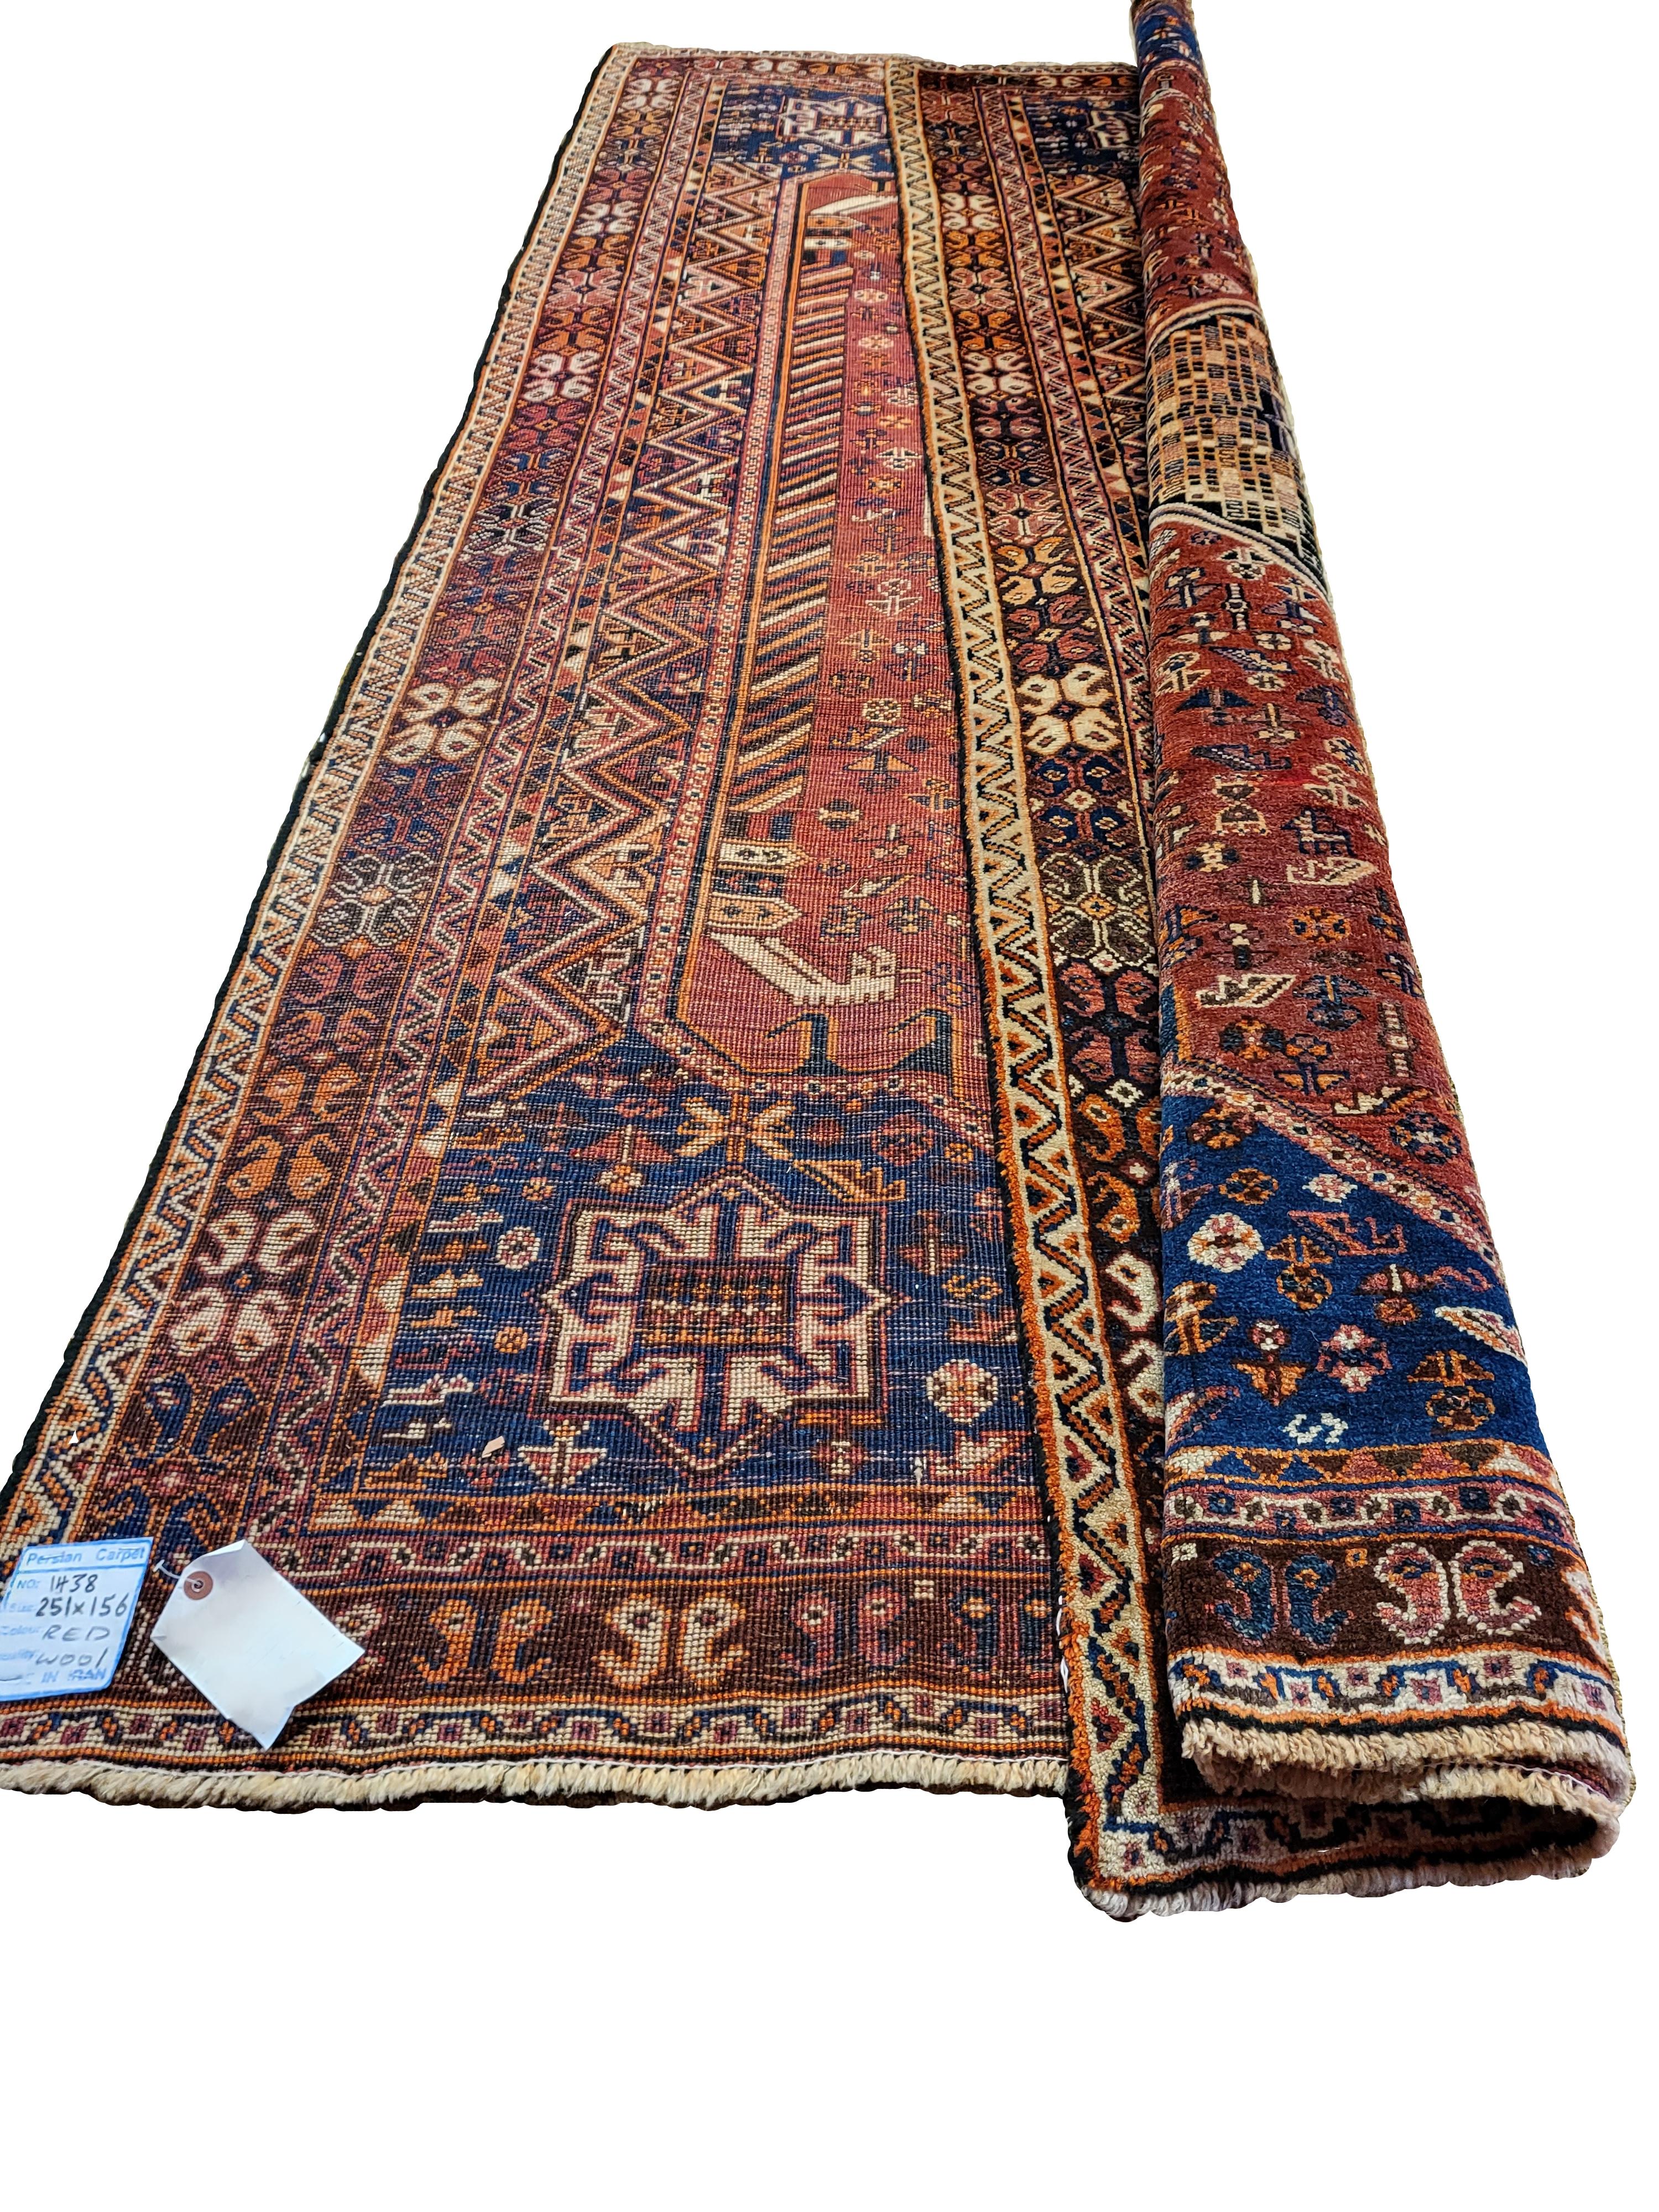 Hand-Knotted Early 1900s Geometric Safi Khani - Qashqai - Nomadic Persian Rug - PRG Exclusive For Sale